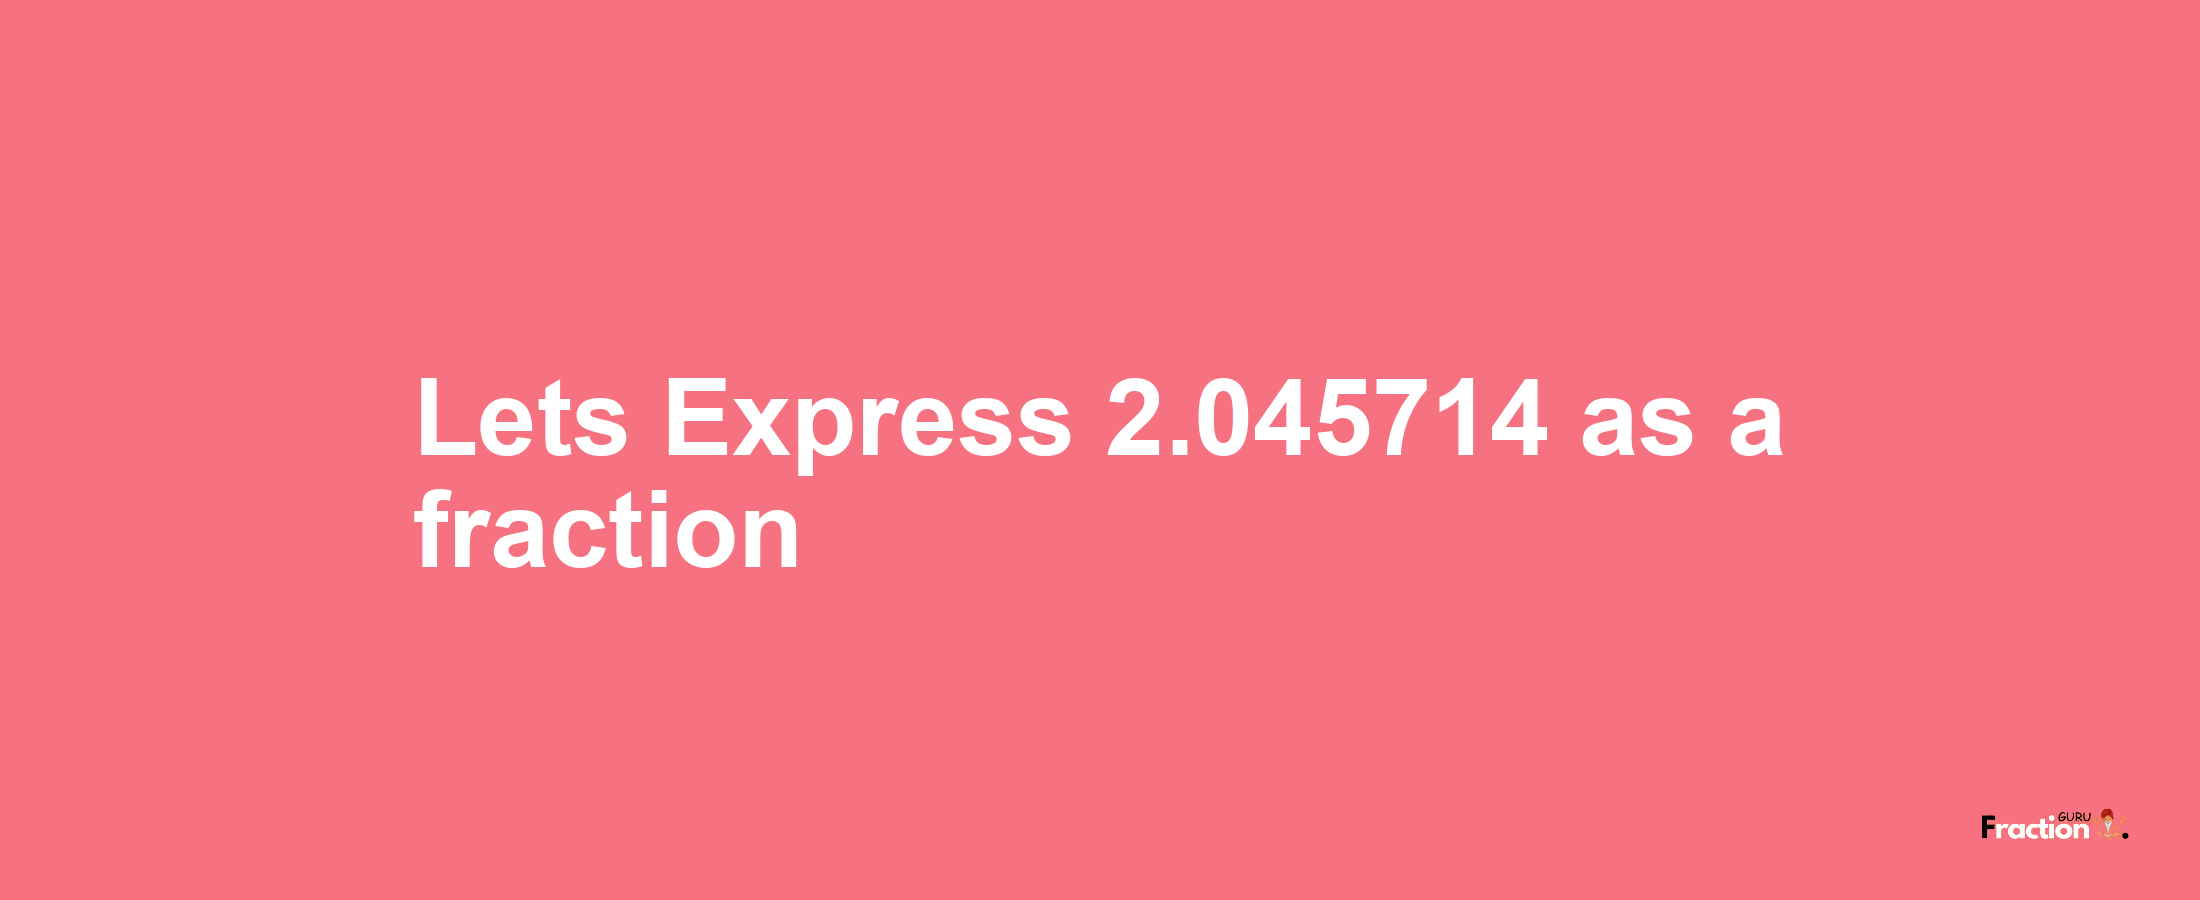 Lets Express 2.045714 as afraction